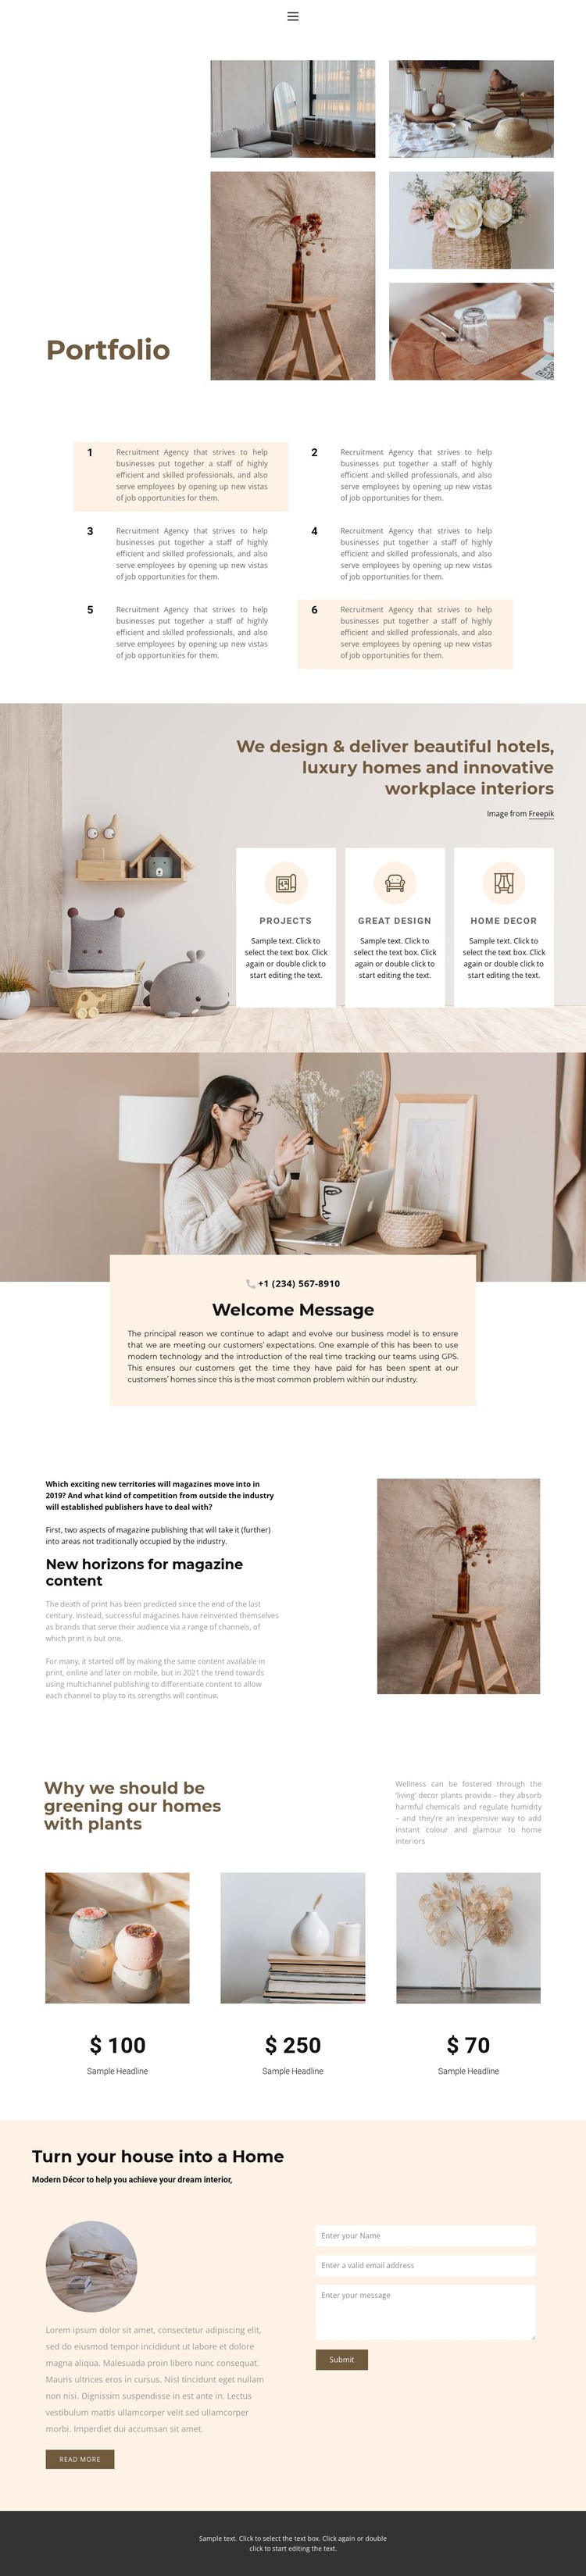 Decorate your home CSS Template